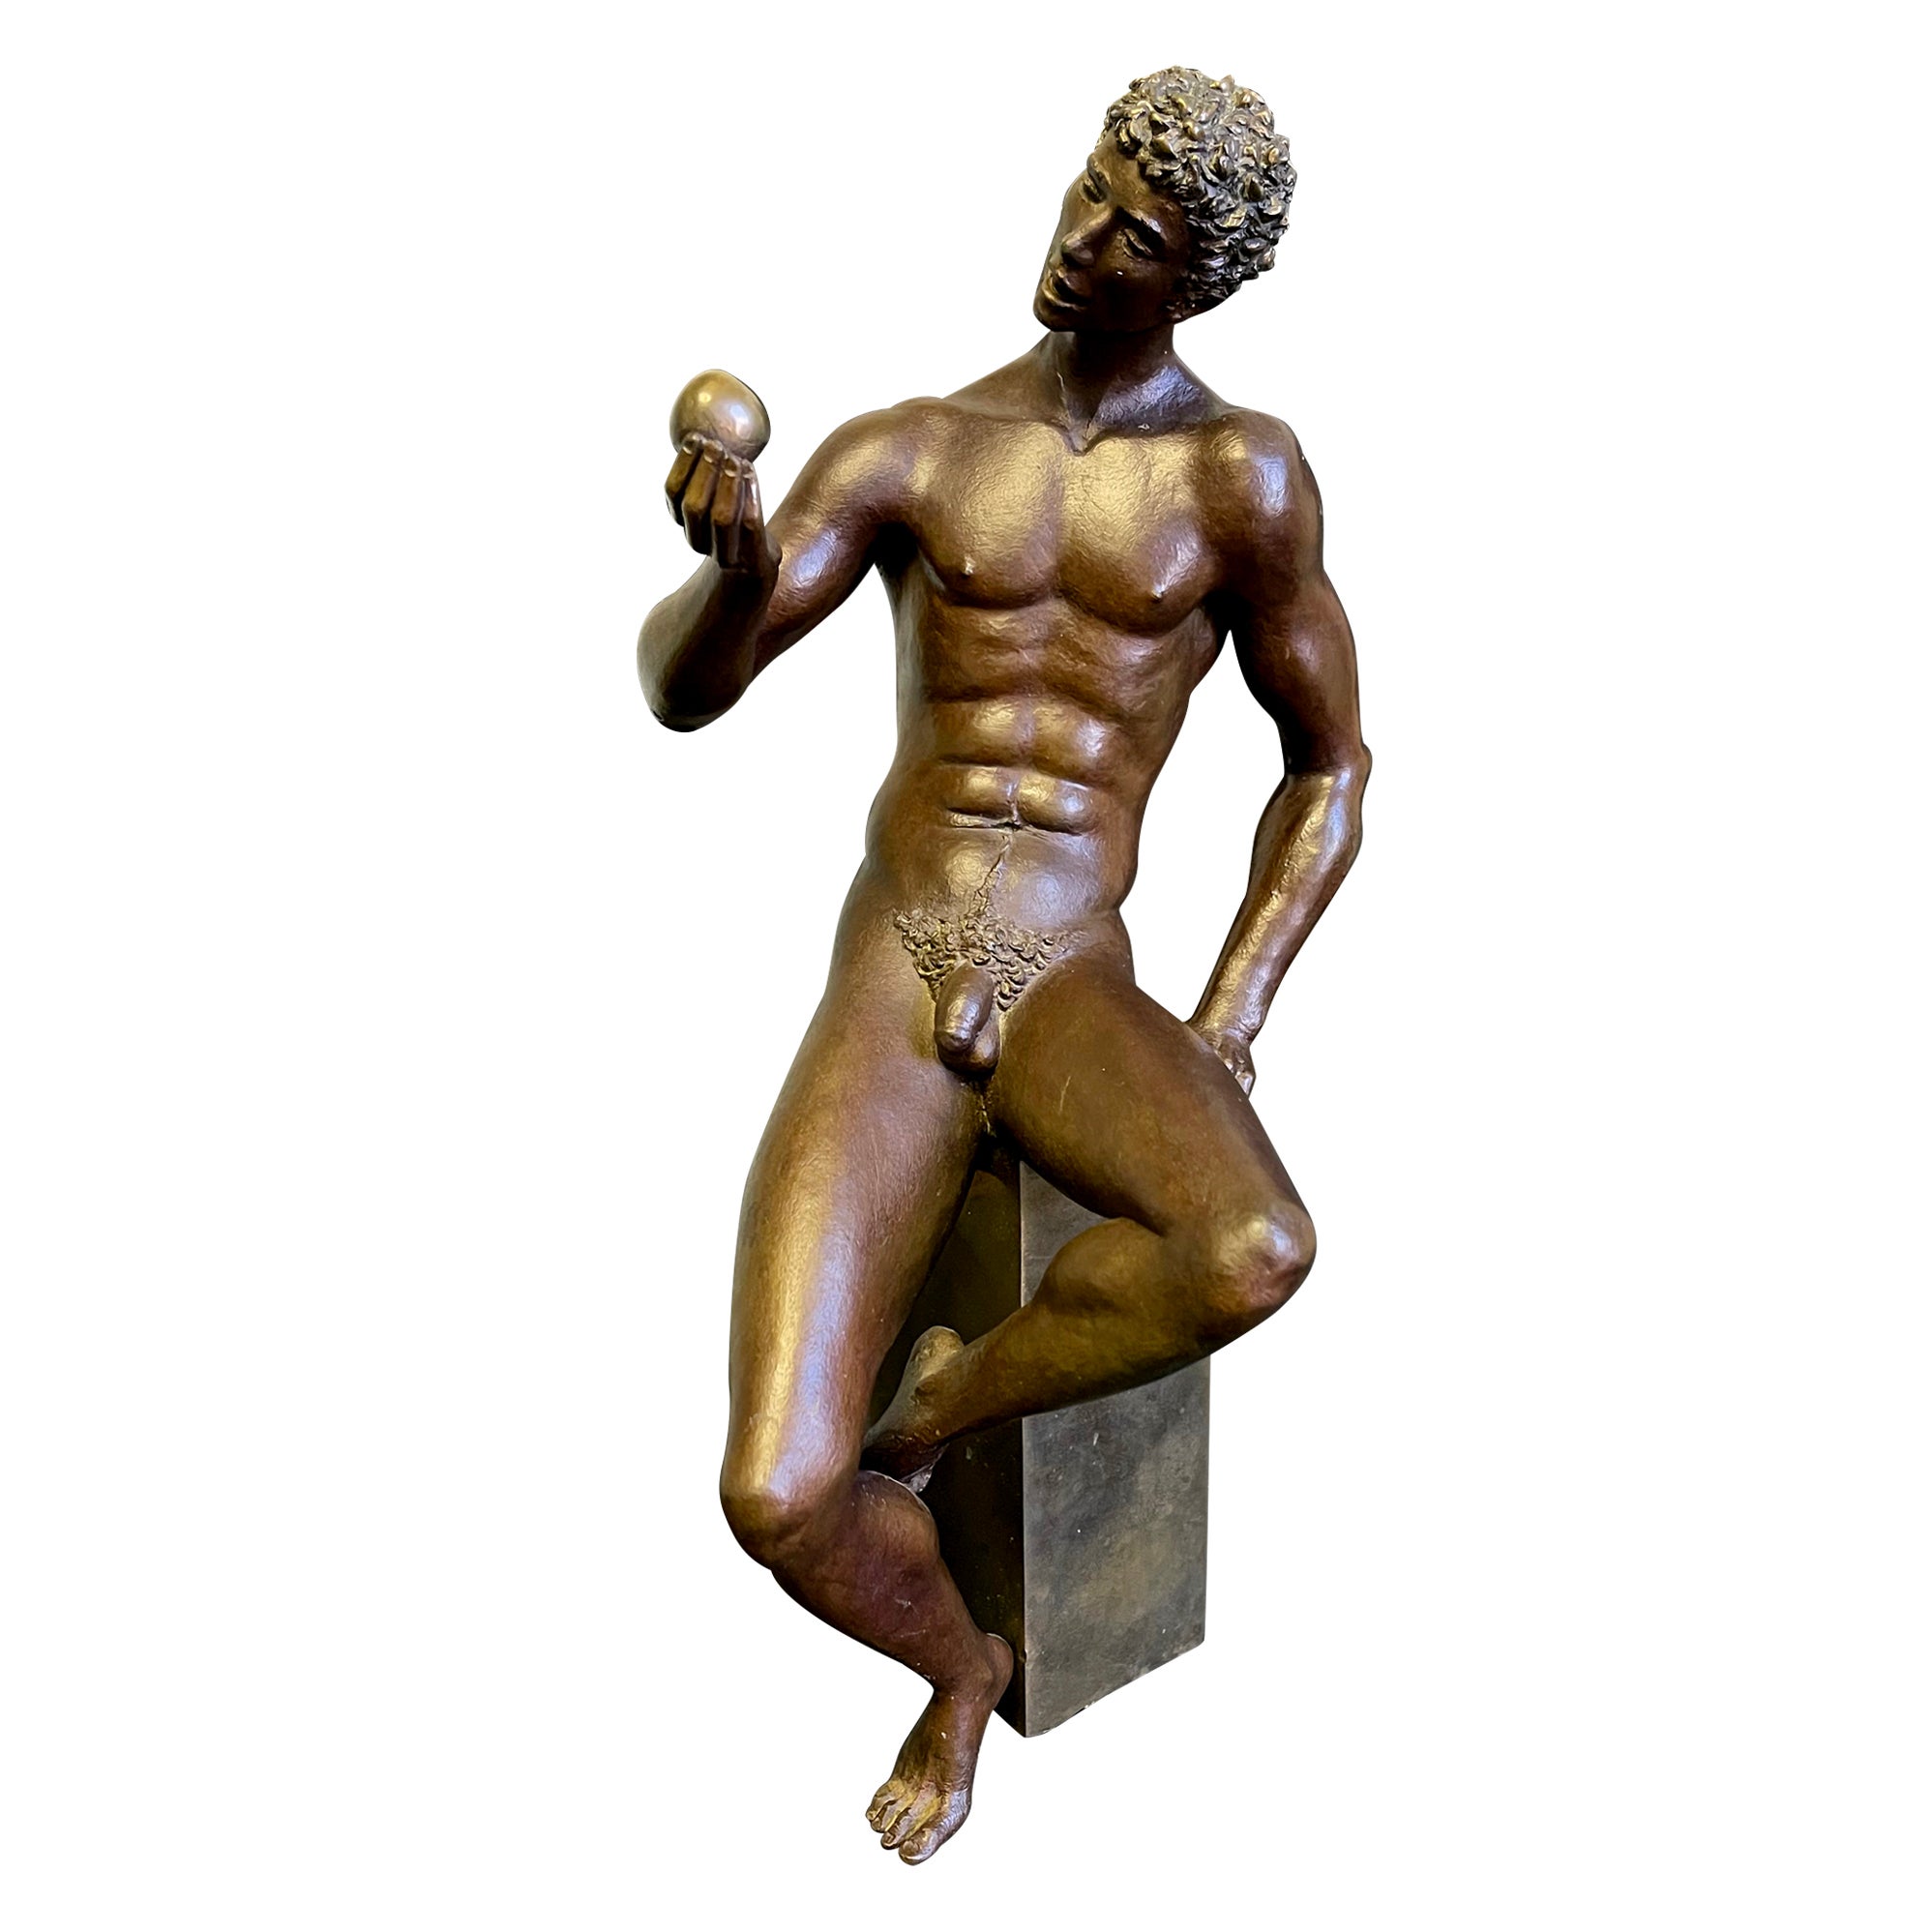 "Adam Contemplating the Apple, " Rare 1970s Sculpture with Male Nude by Choate